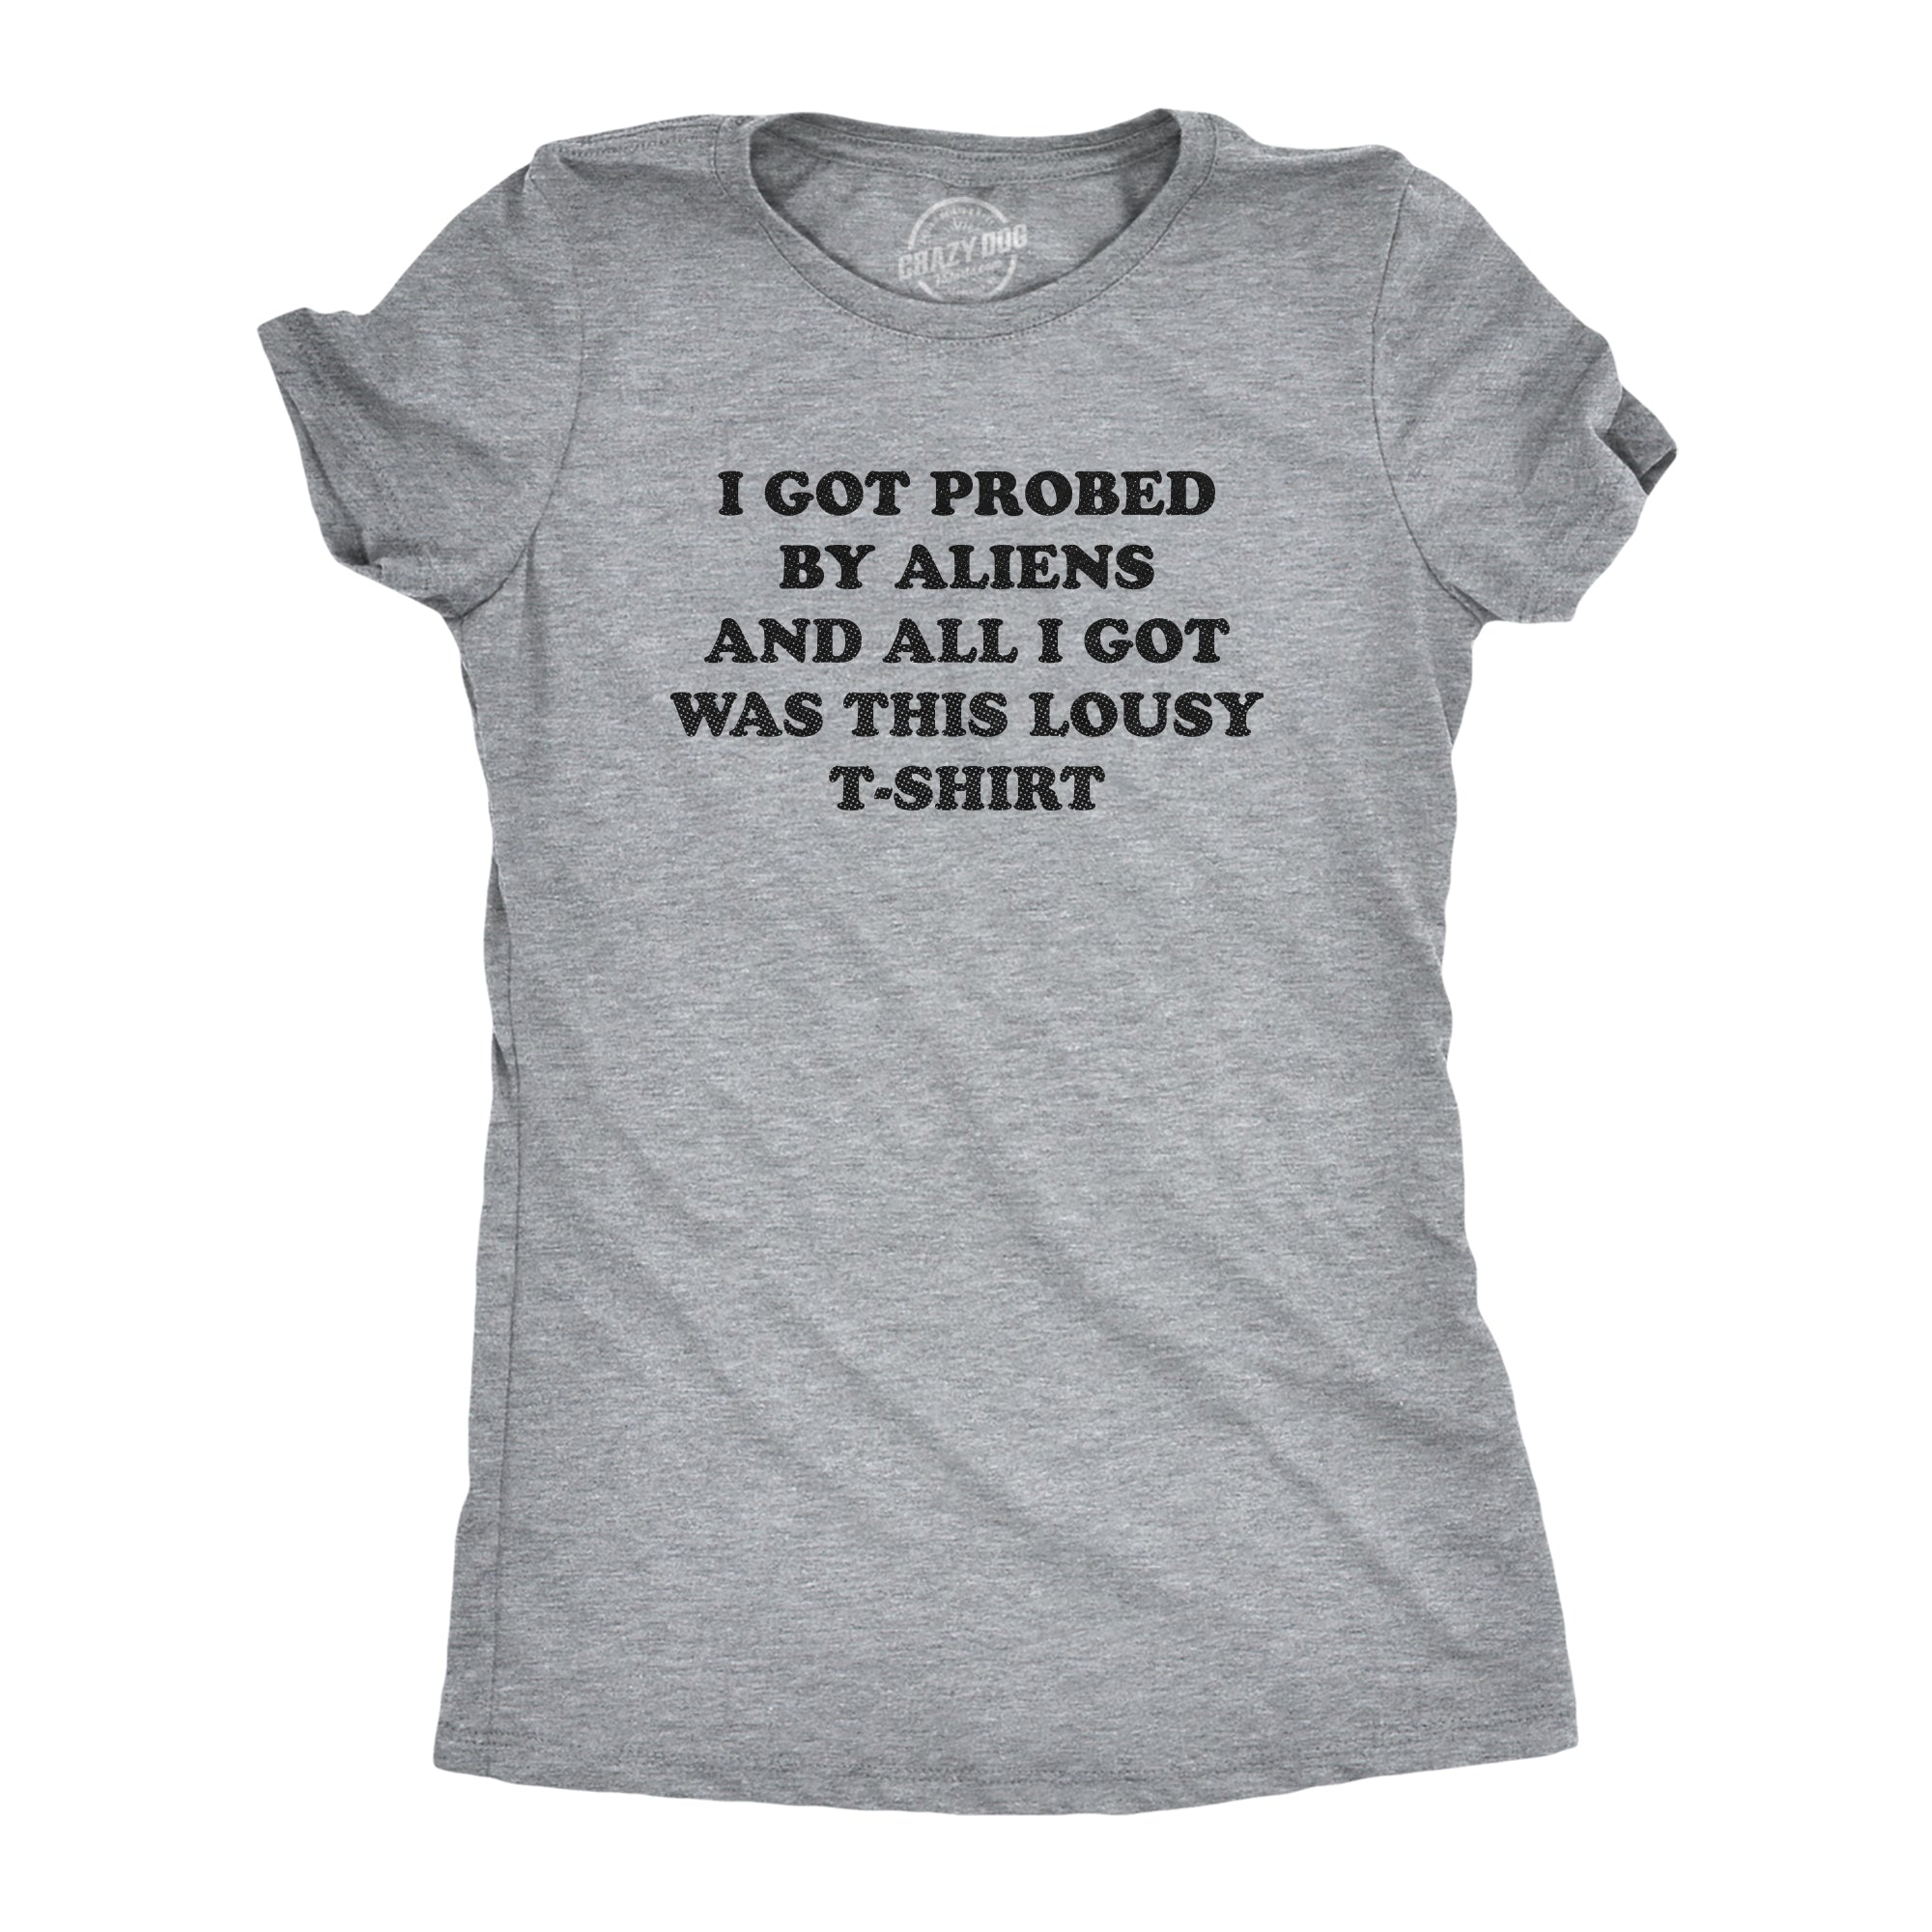 Funny Light Heather Grey - PROBED I Got Probed By Aliens And All I Got Was This Lousy T Shirt Womens T Shirt Nerdy Sarcastic Tee